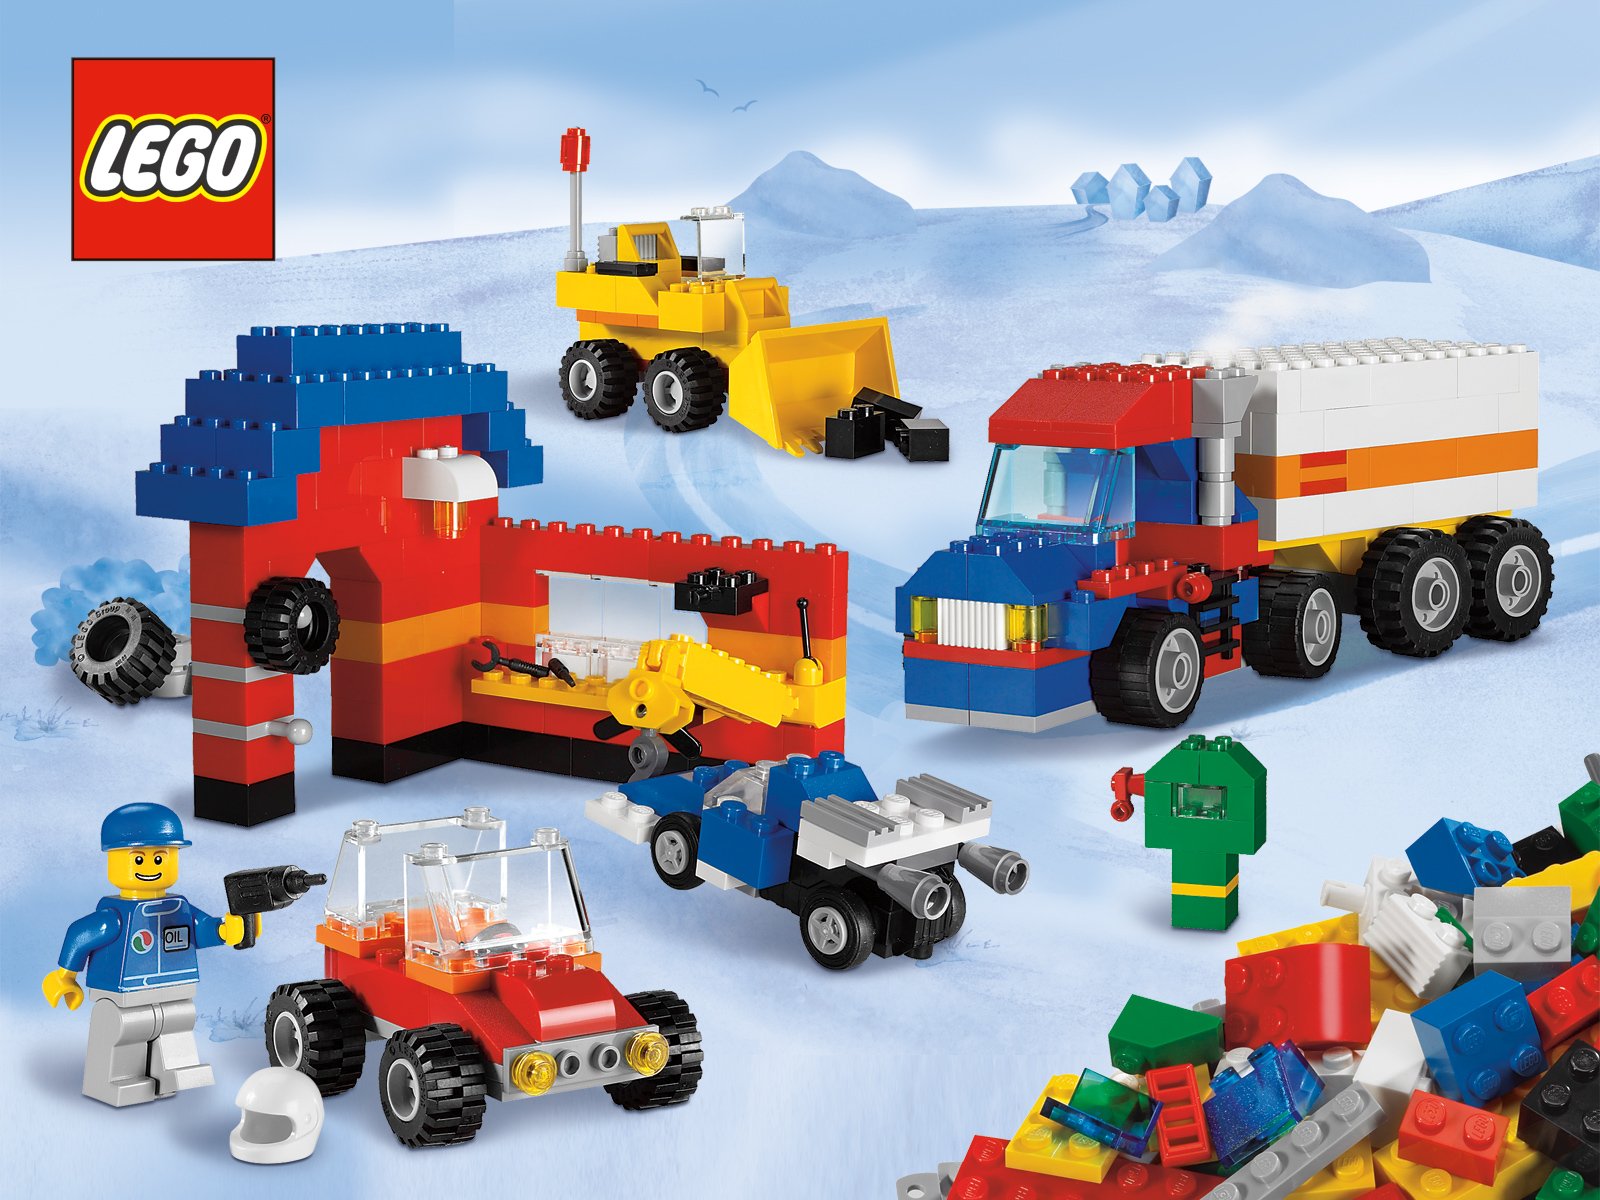 Lego Brick And More Desktop Wallpapers for HD Widescreen and 1600x1200